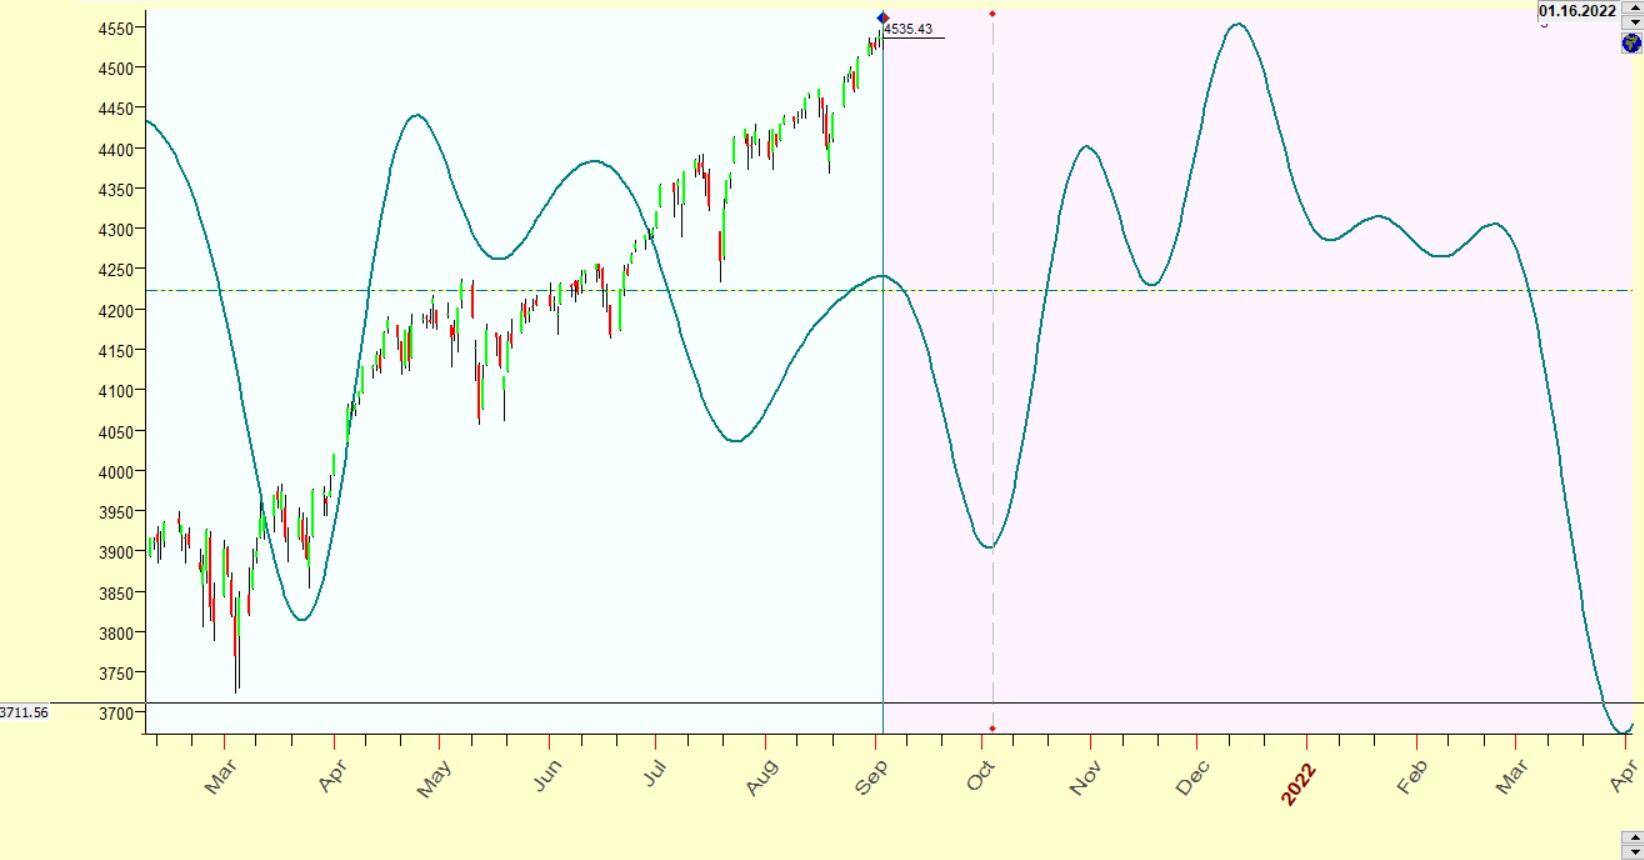 sp500 cycles september 2021